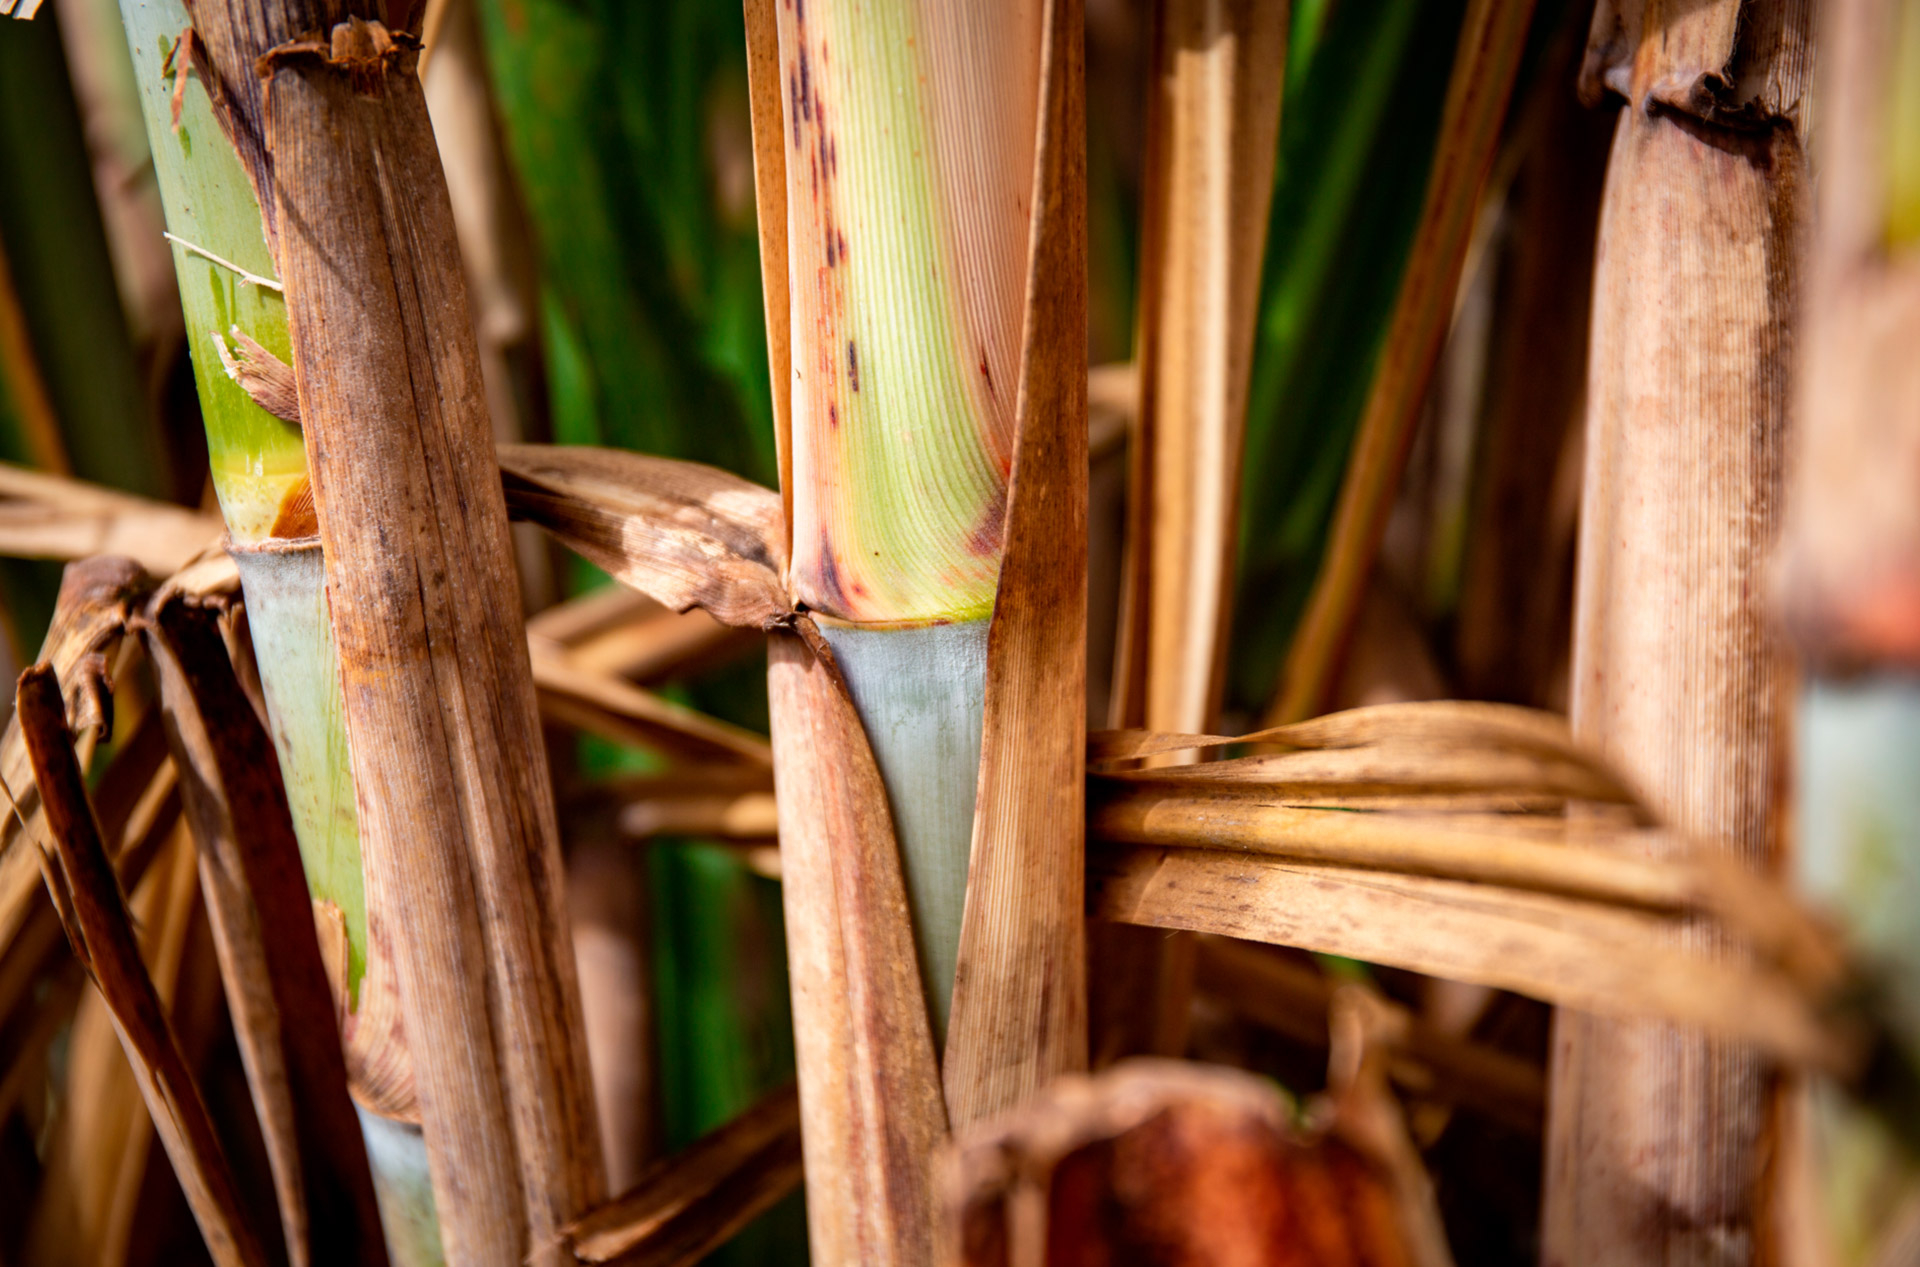 Sugarcane harvest for the first half of July 2021